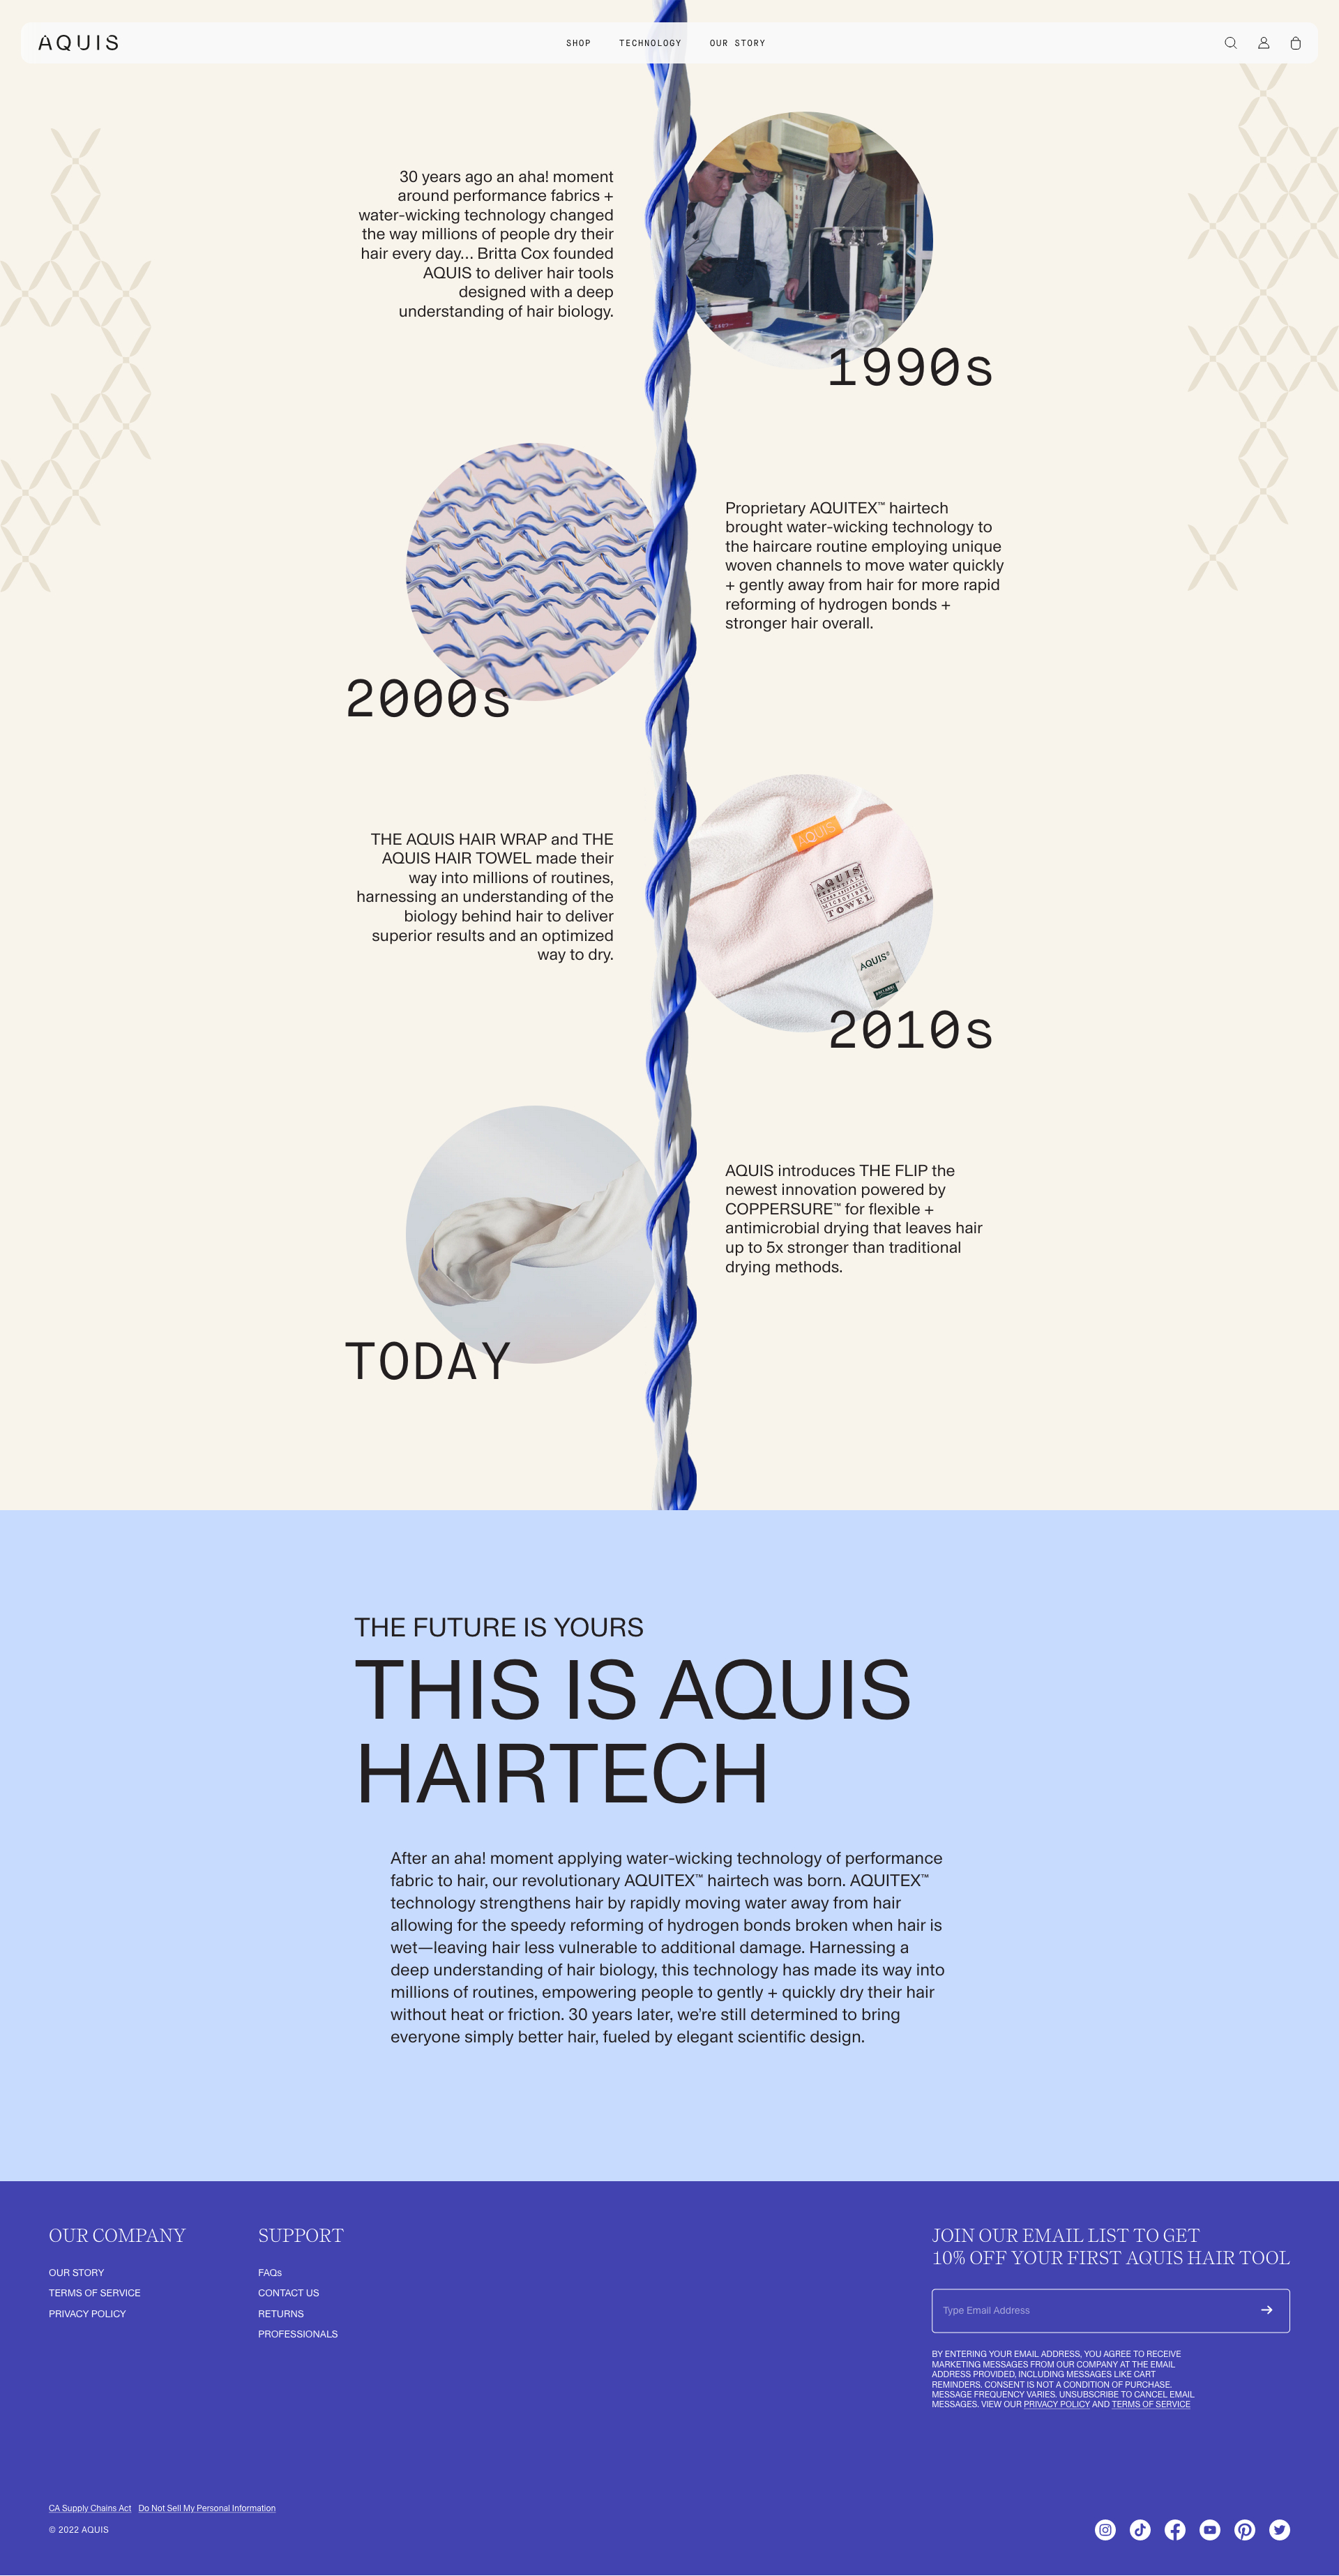 AQUIS Landing Page Example: At AQUIS, we use science to simplify your hair care routine. Our products cut drying time by 50%, protect hair from frizz and prime it for effortless styling.